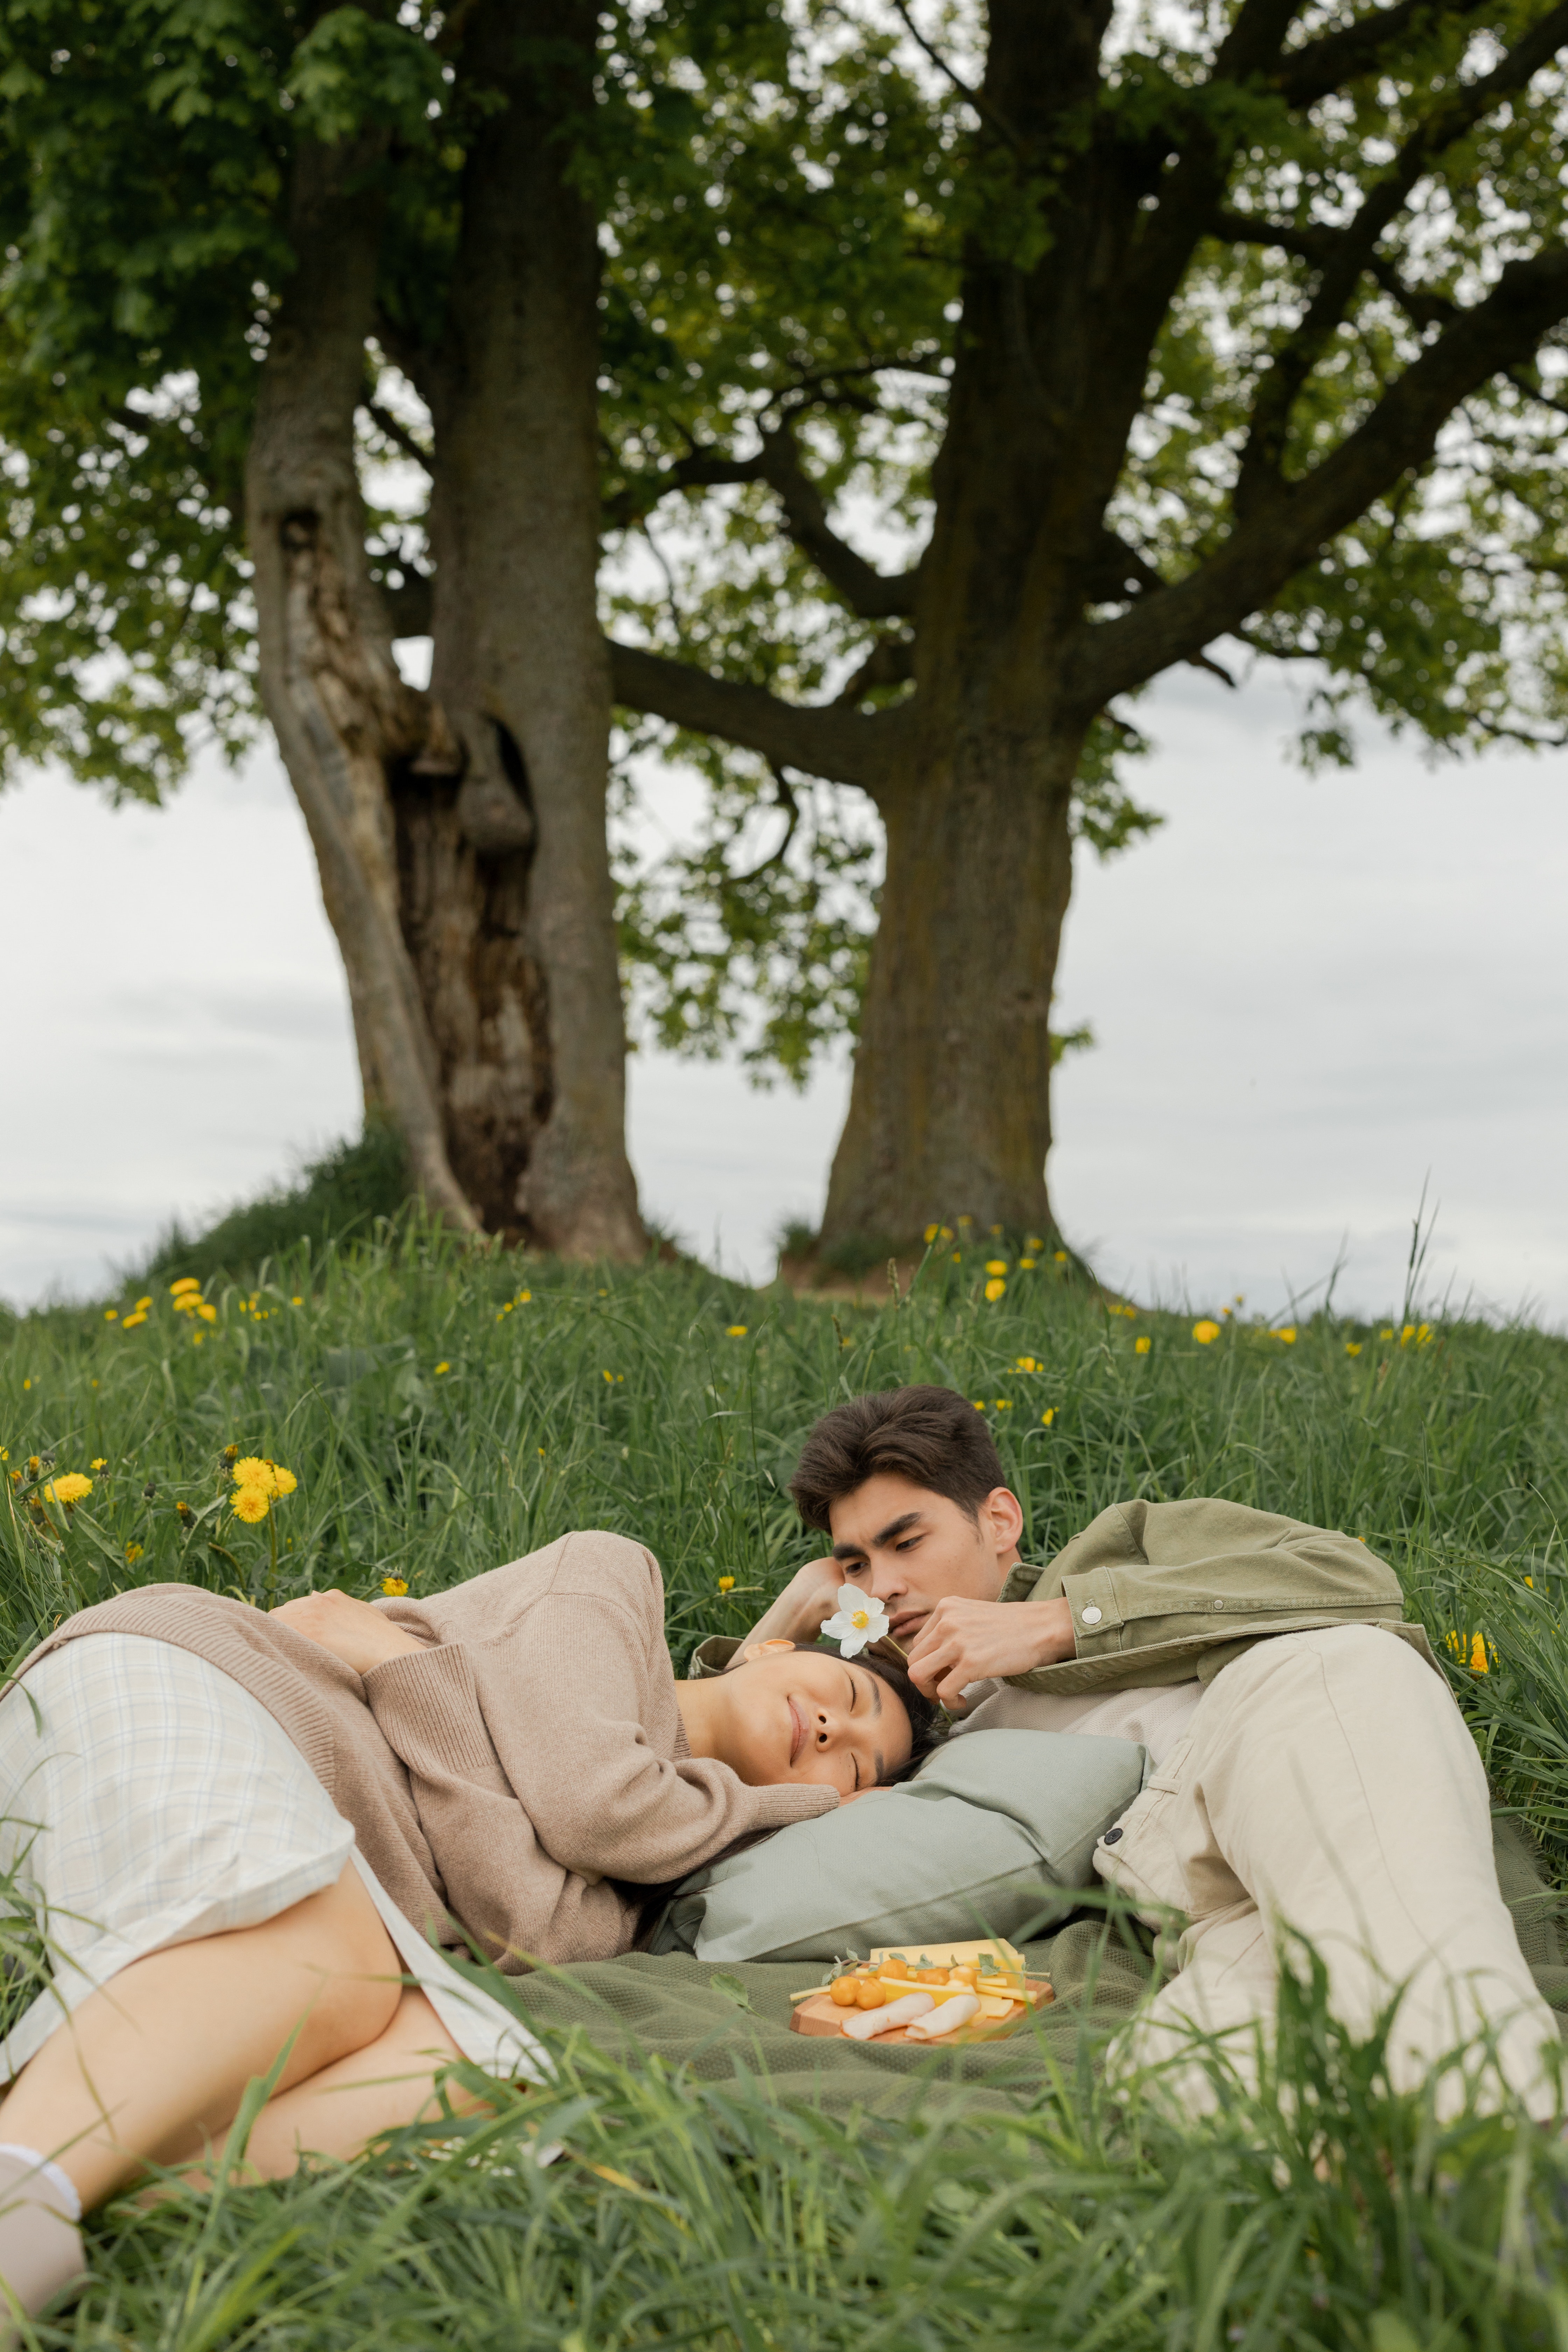 A couple lying on the grass. | Source: Pexels